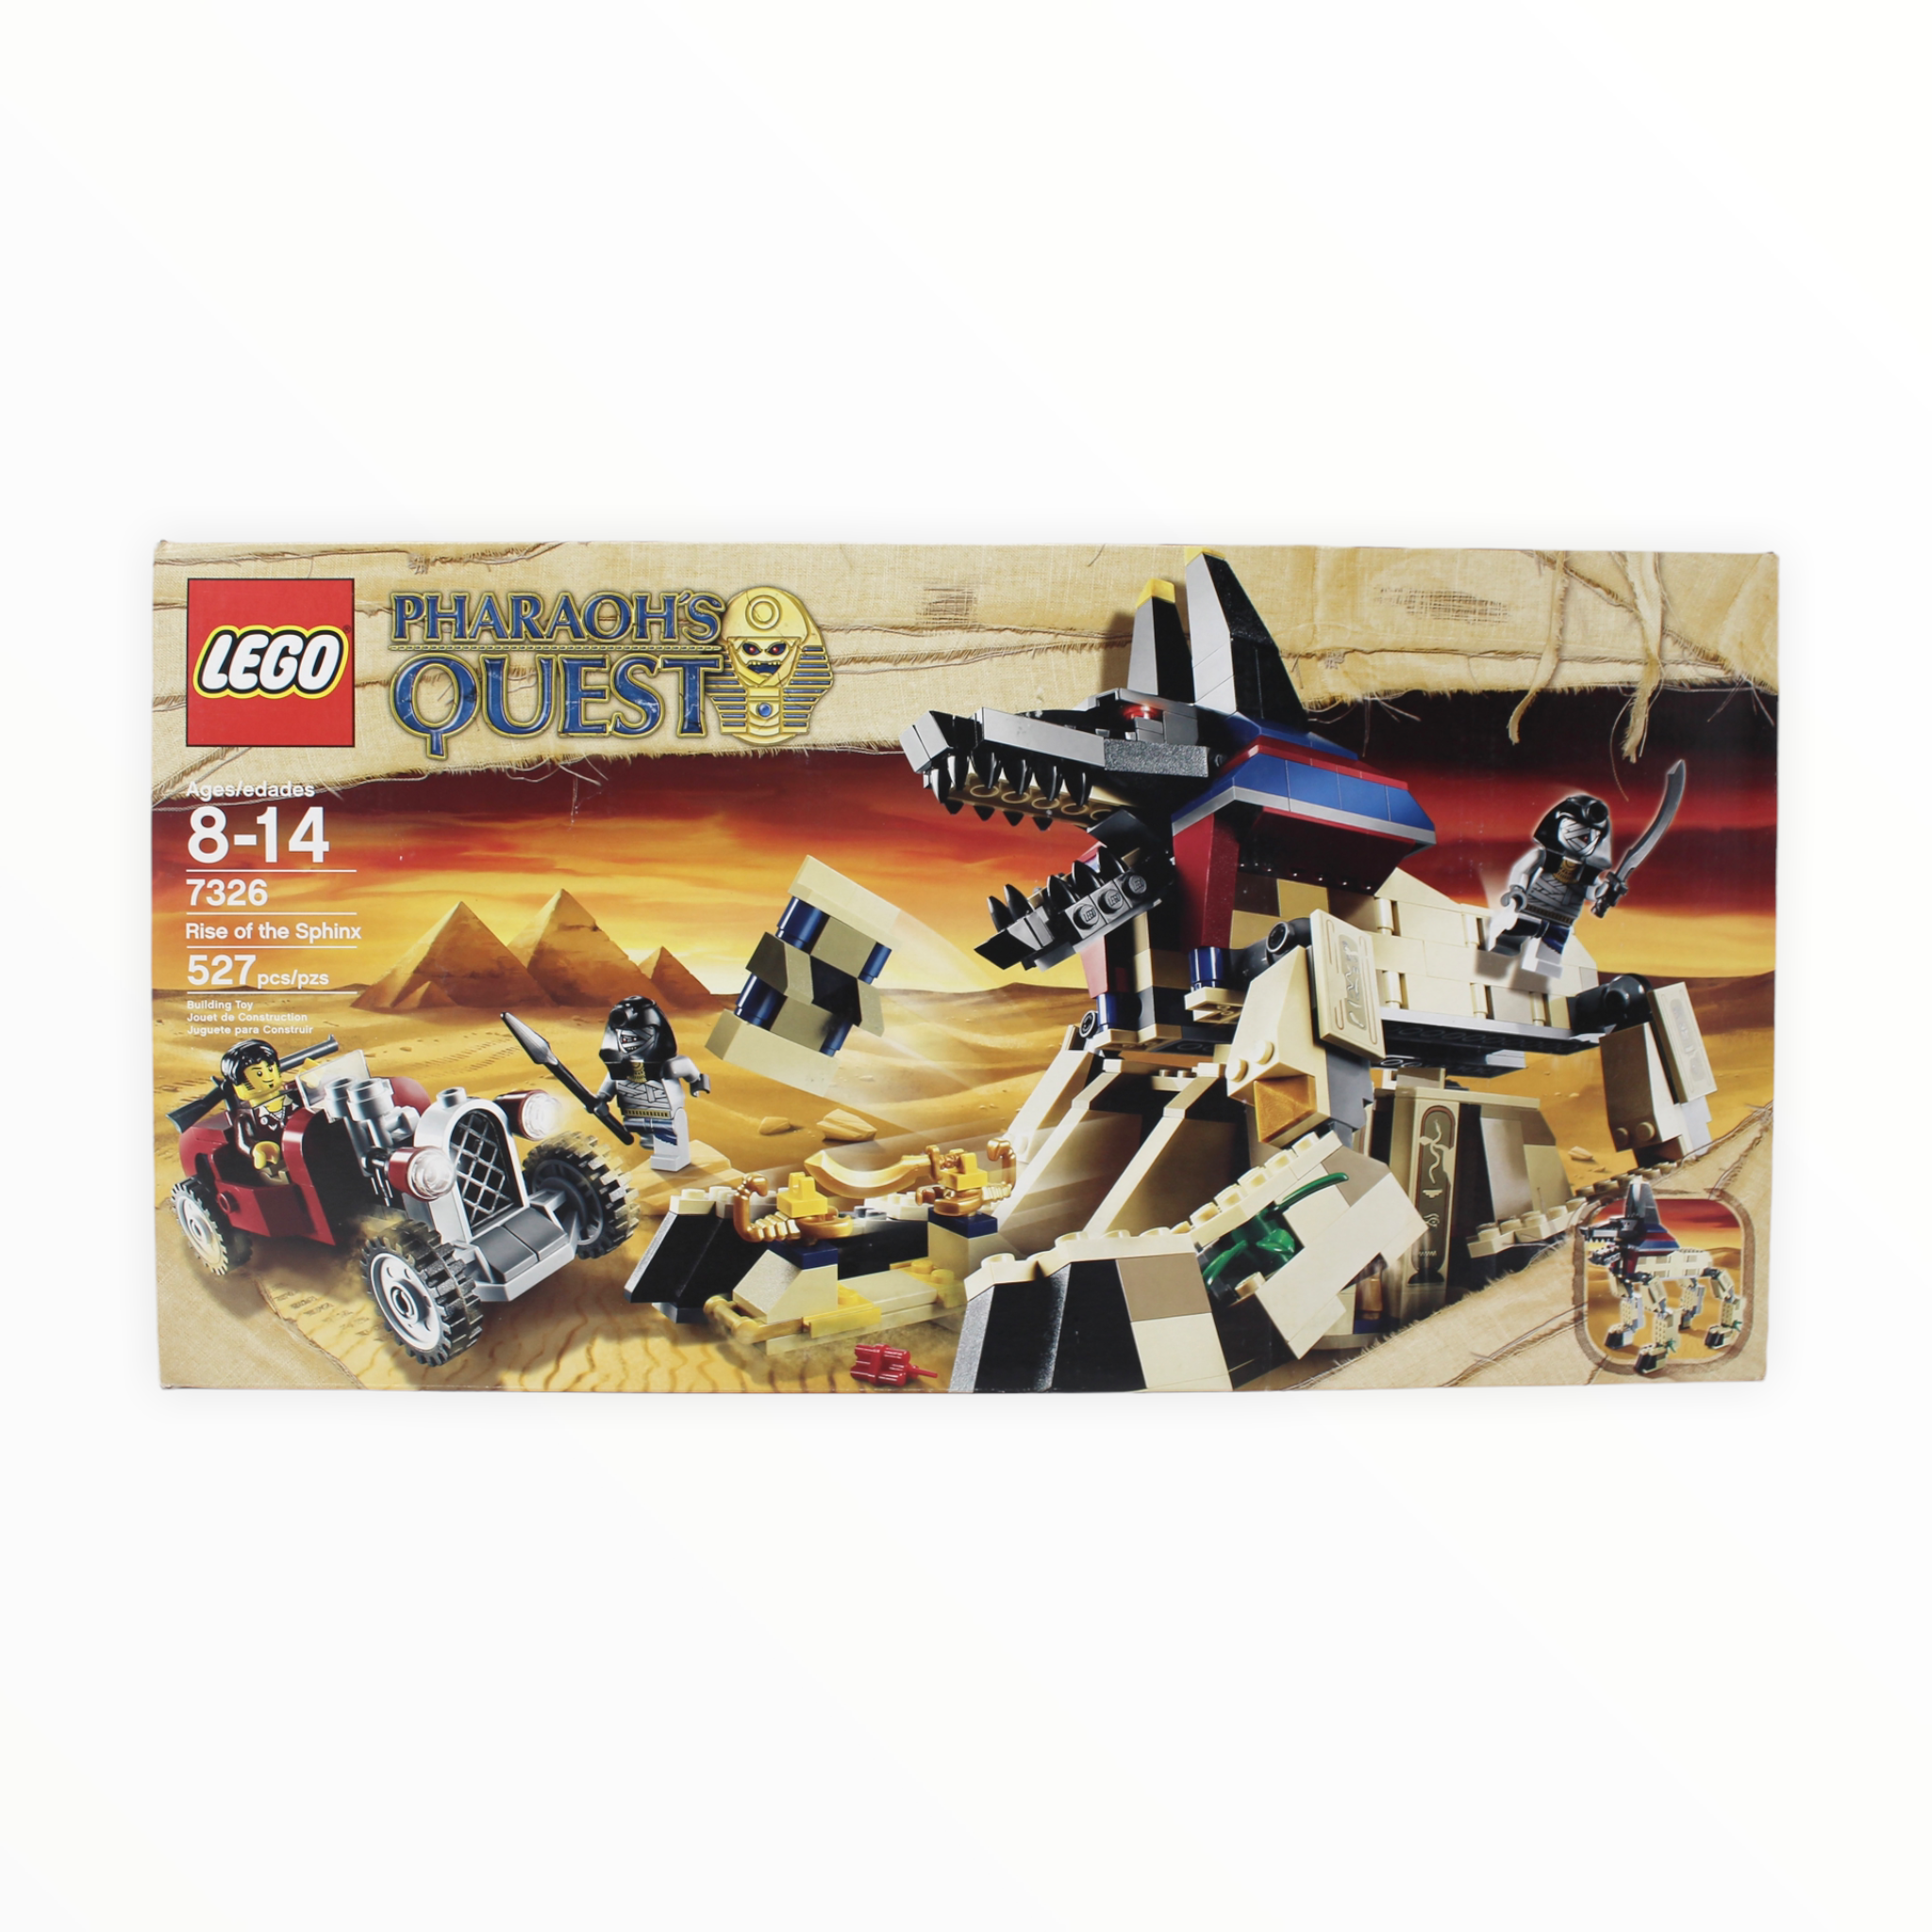 Certified Used Set 7326 Pharaoh’s Quest Rise of the Sphinx